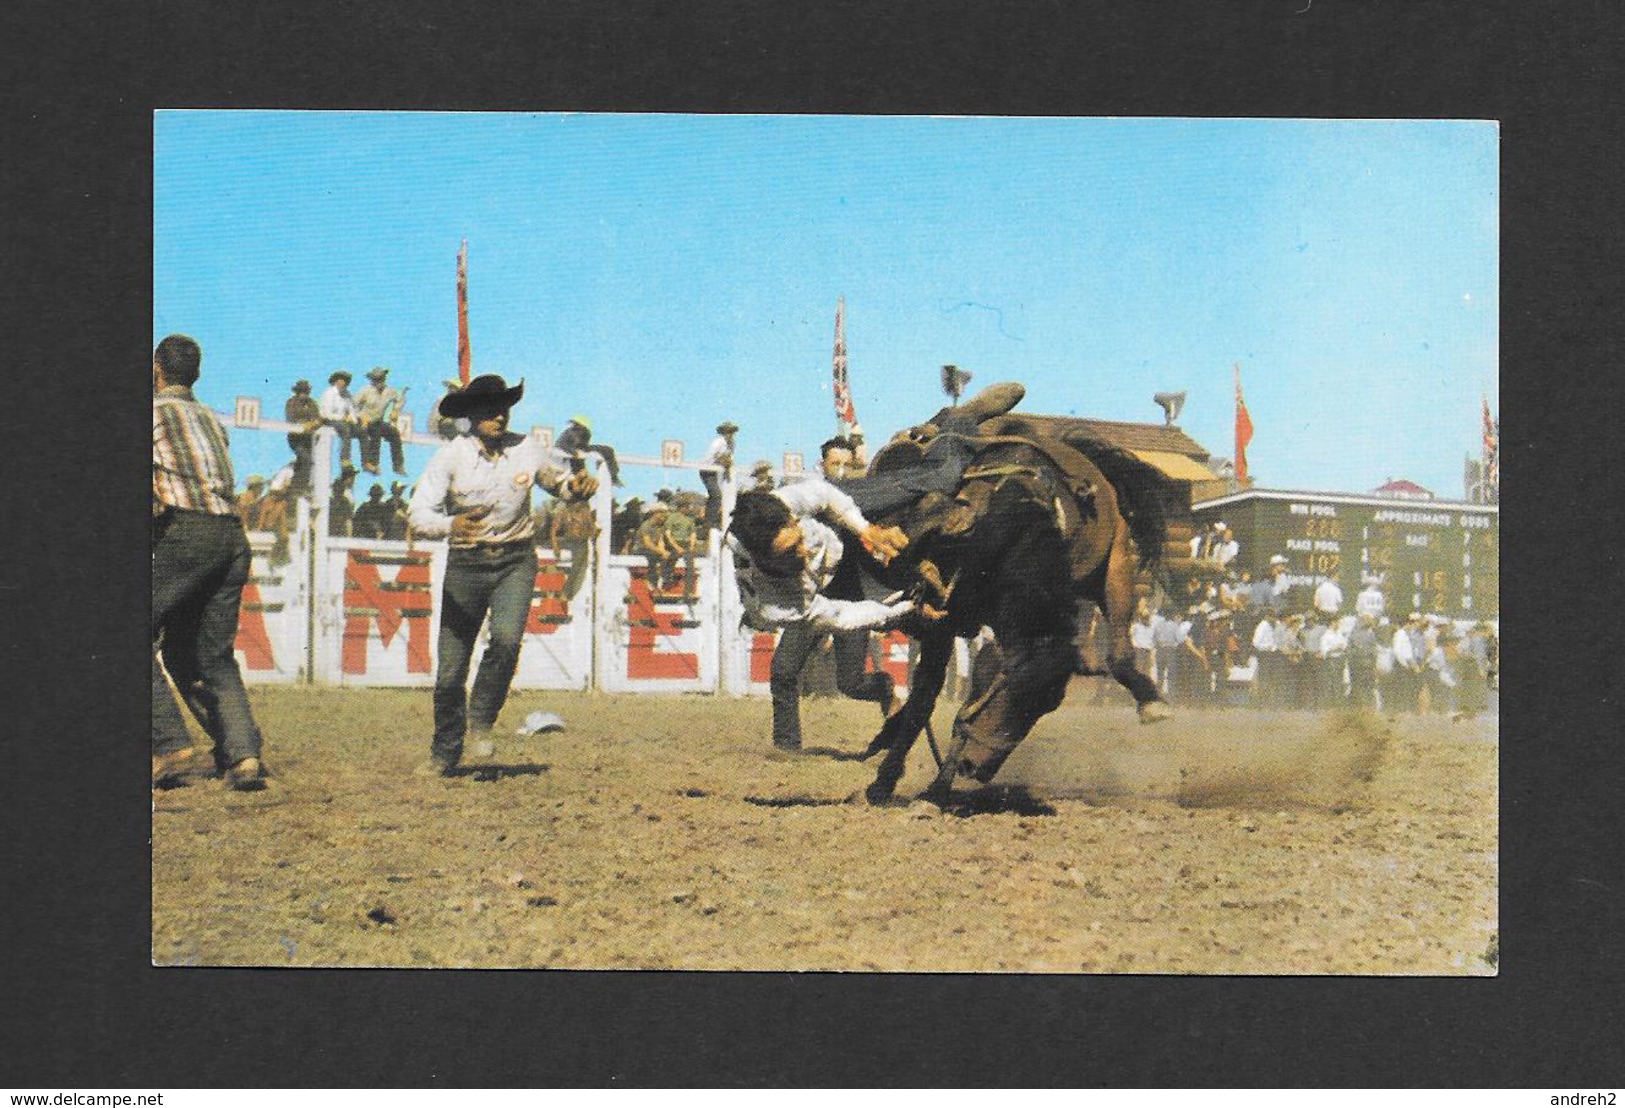 CALGARY - ALBERTA - THE BACKING HORSE CONTEST IS ONE OF THE MANY EVENTS TO BE SEEN AT THE FAMOUS STAMPEDE IN CALGARY - Calgary